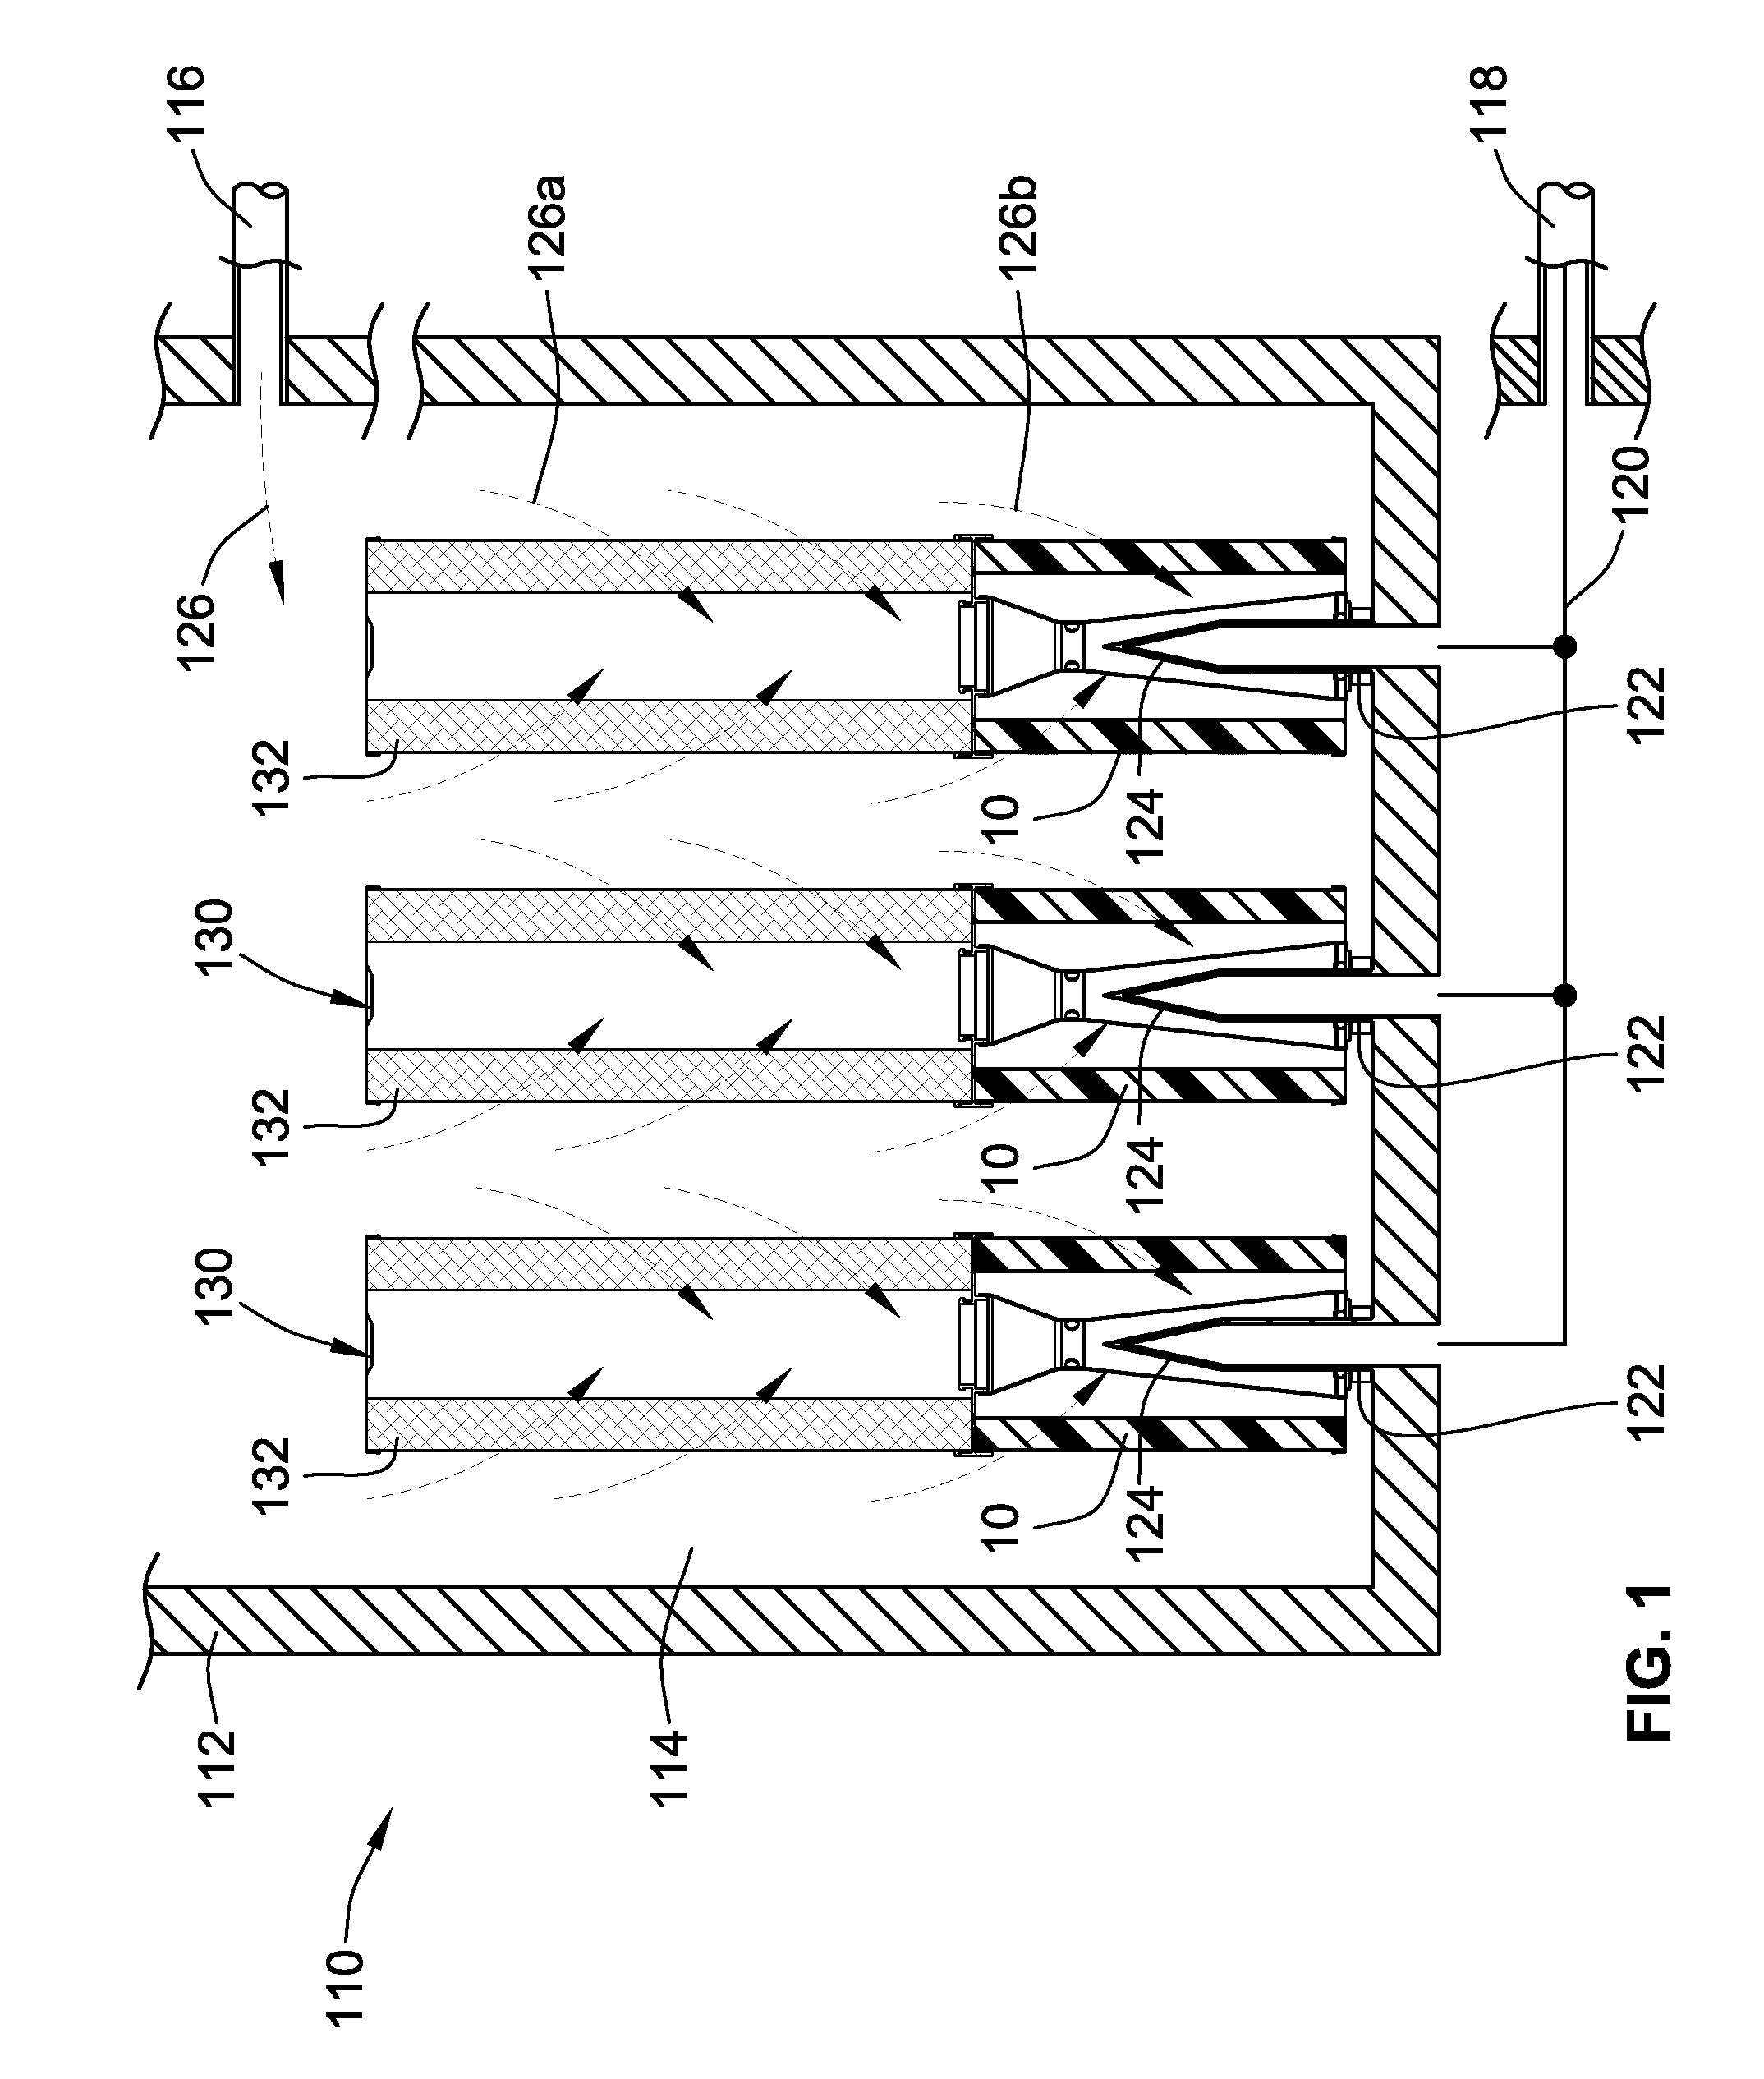 Particulate and Bypass Filter and Locomotive Oil Lube Filtration System